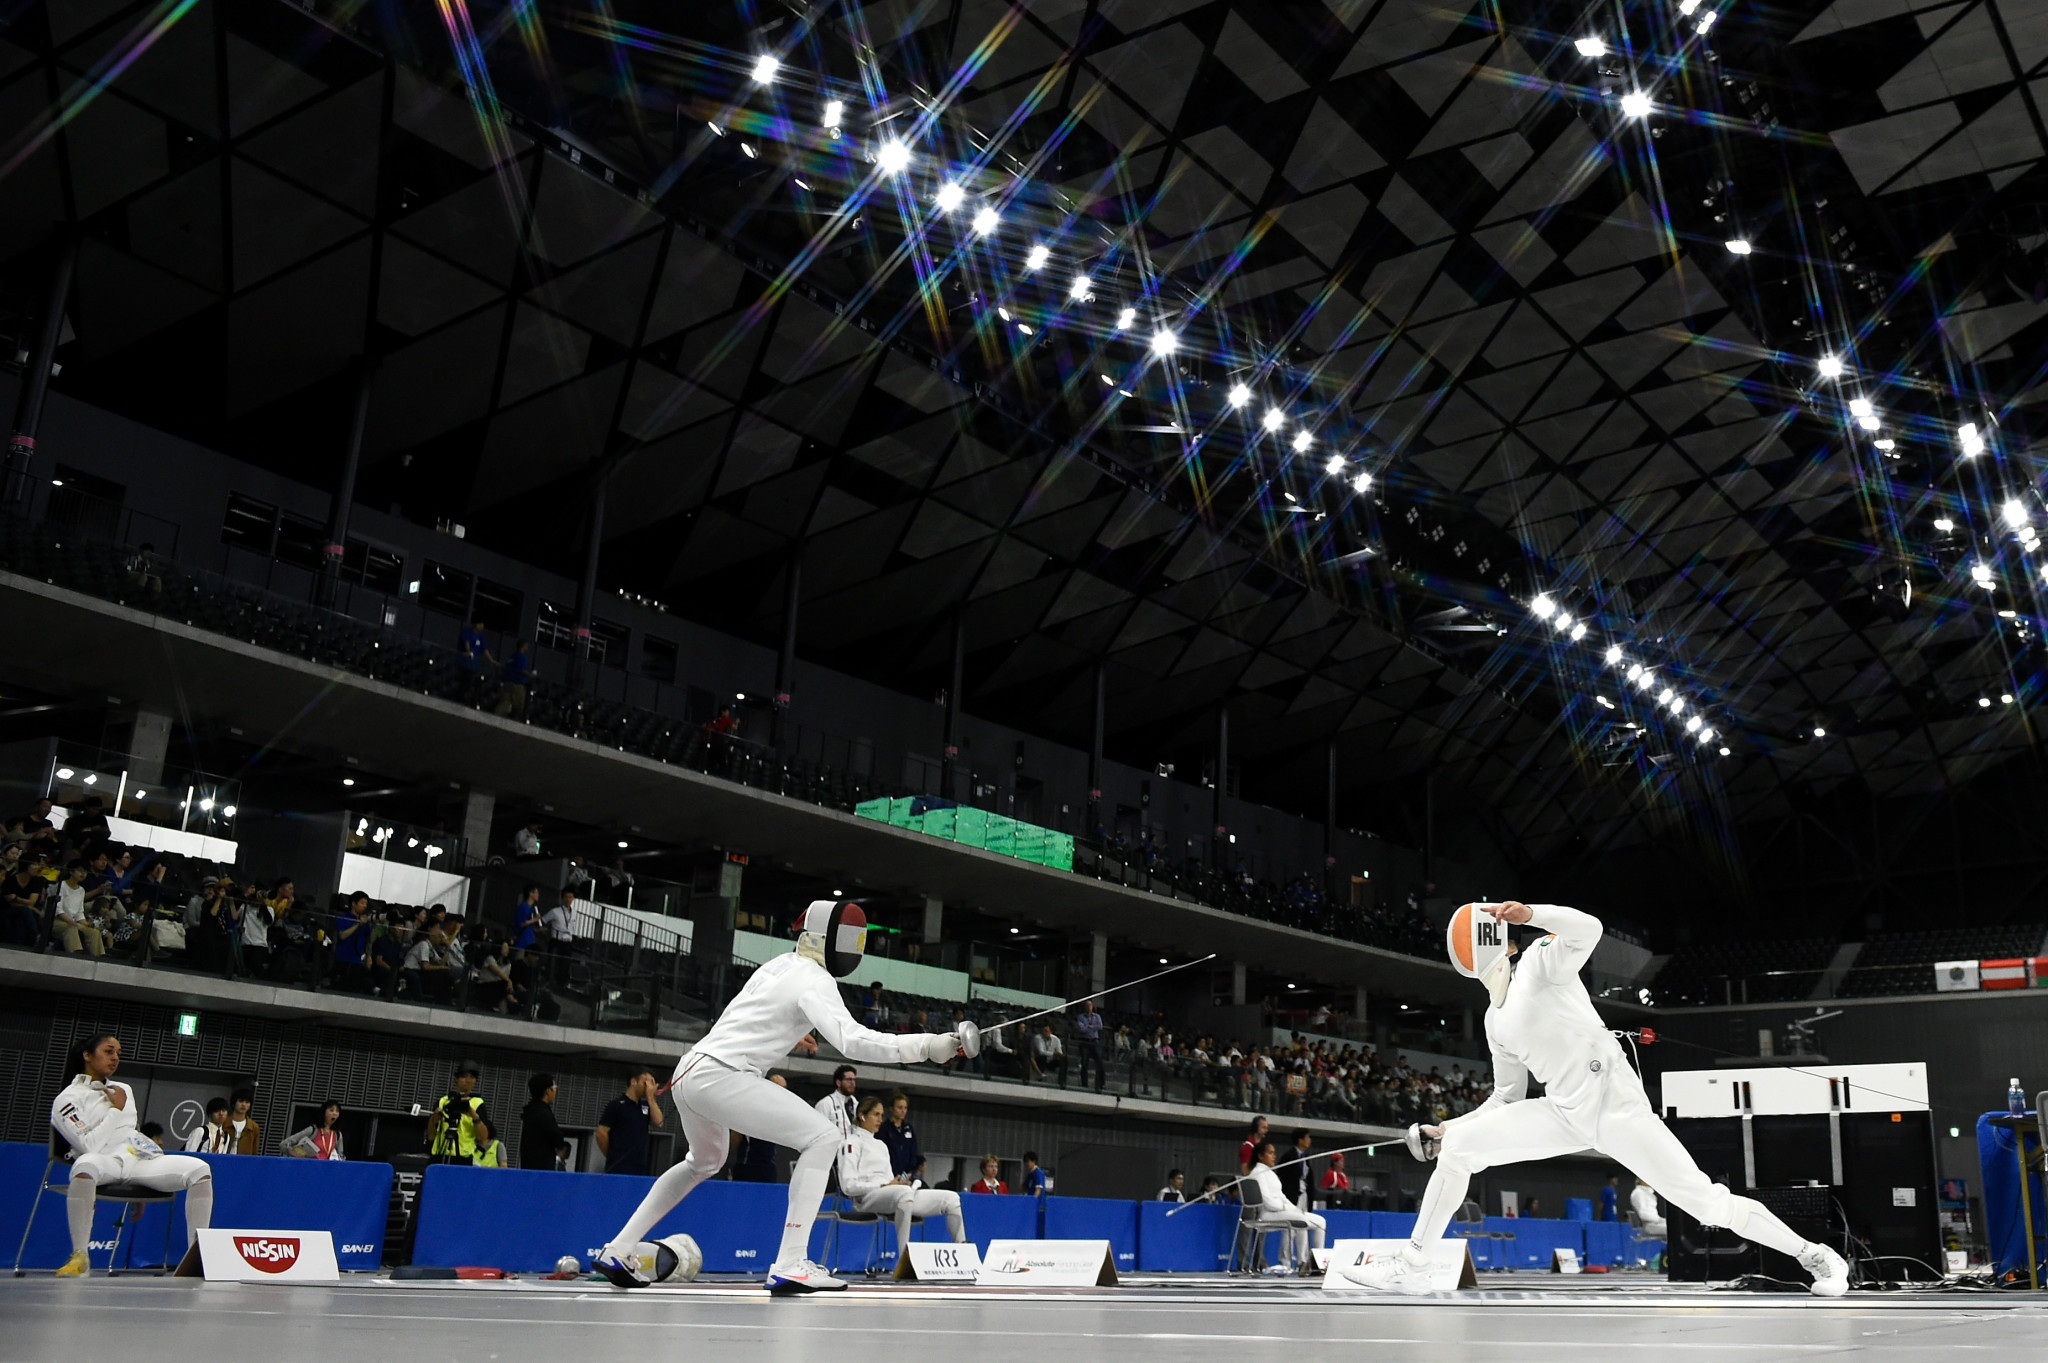 The 2021 modern pentathlon season is set to start with a World Cup in Budapest in March ©Getty Images